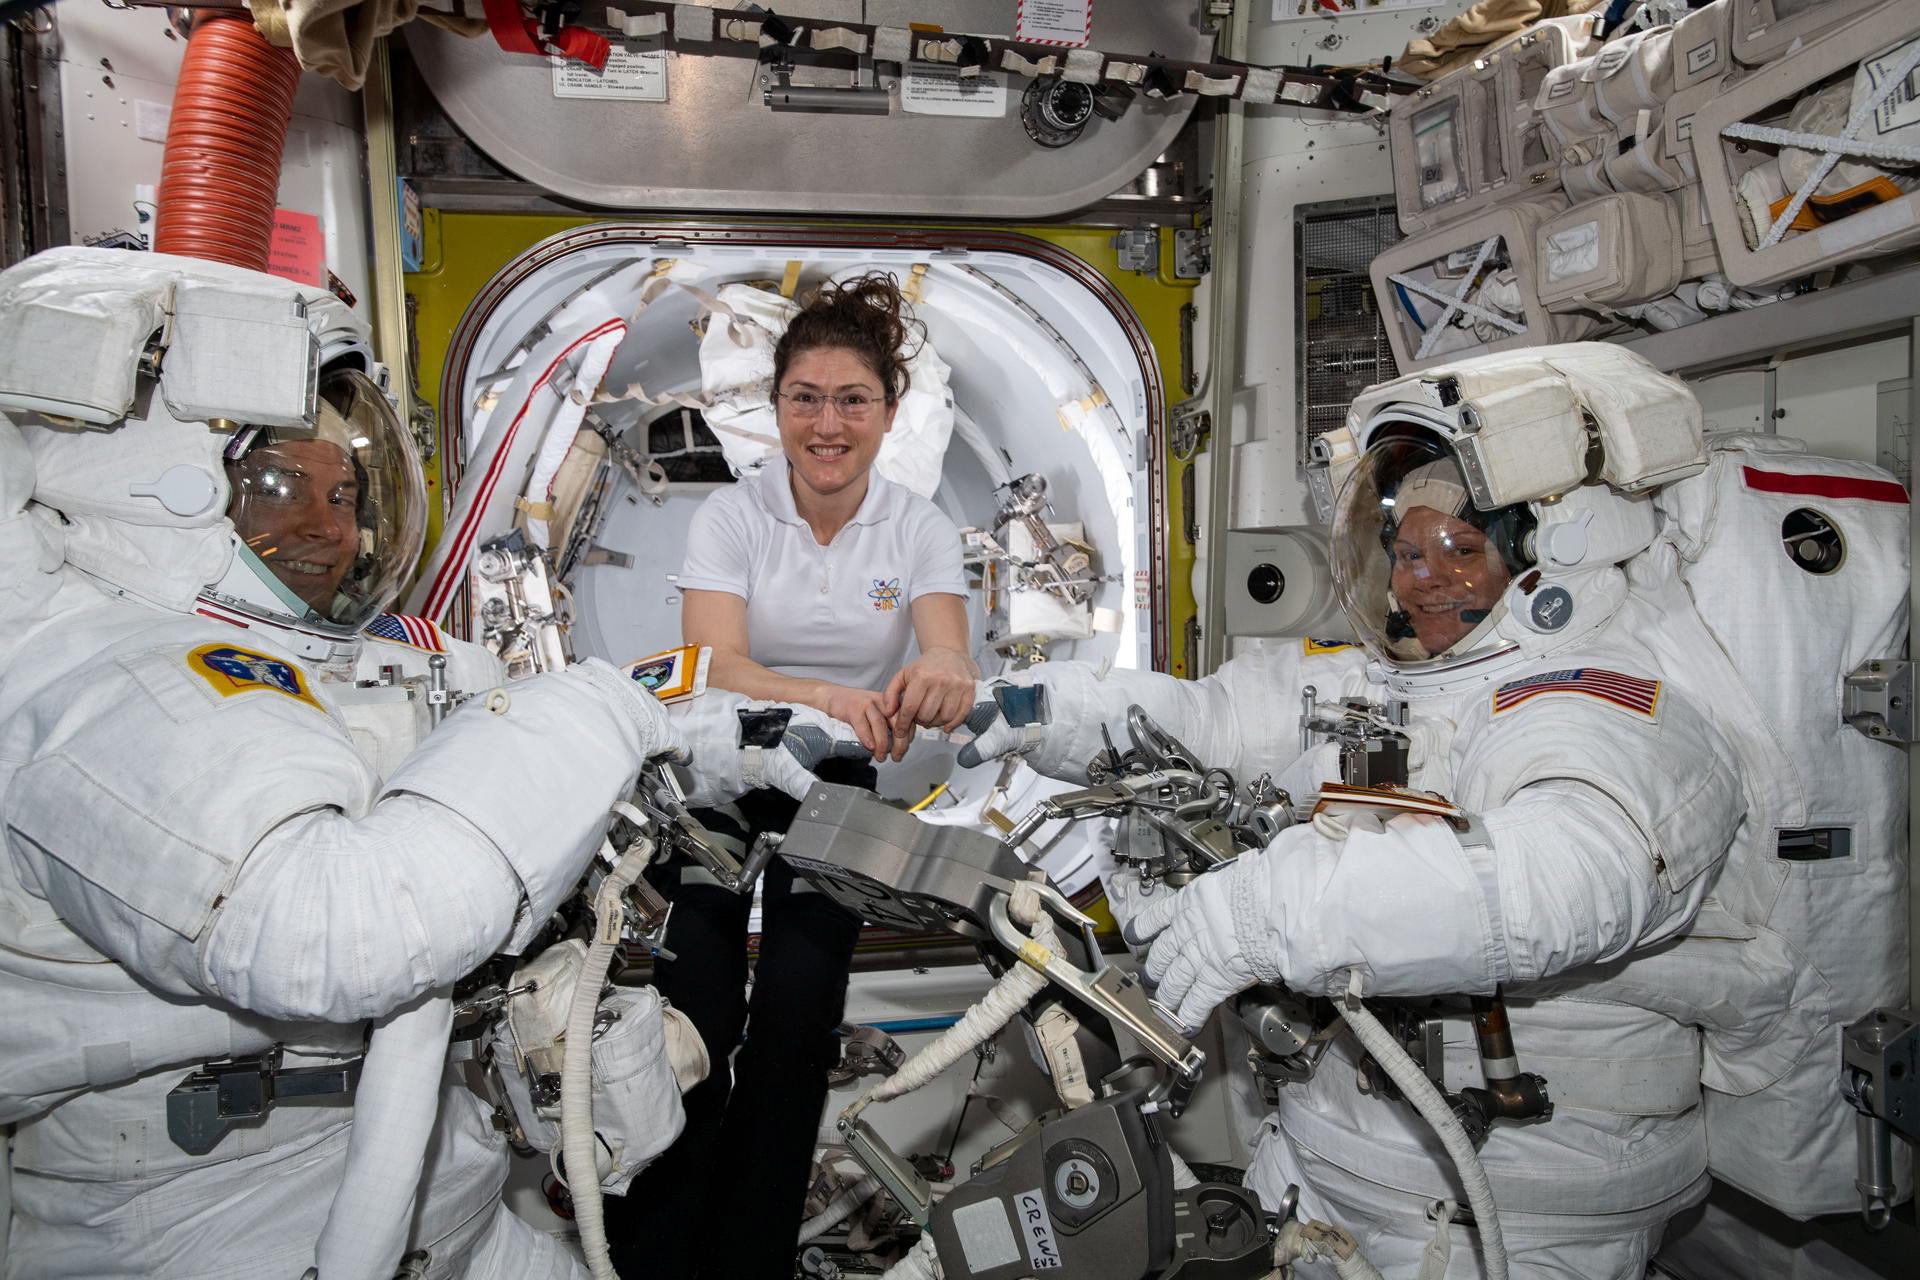 Nasa astronaut Christina Koch assist fellow astronauts Nick Hague and Anne McClain in their US spacesuits shortly before they begin the first spacewalk of their careers